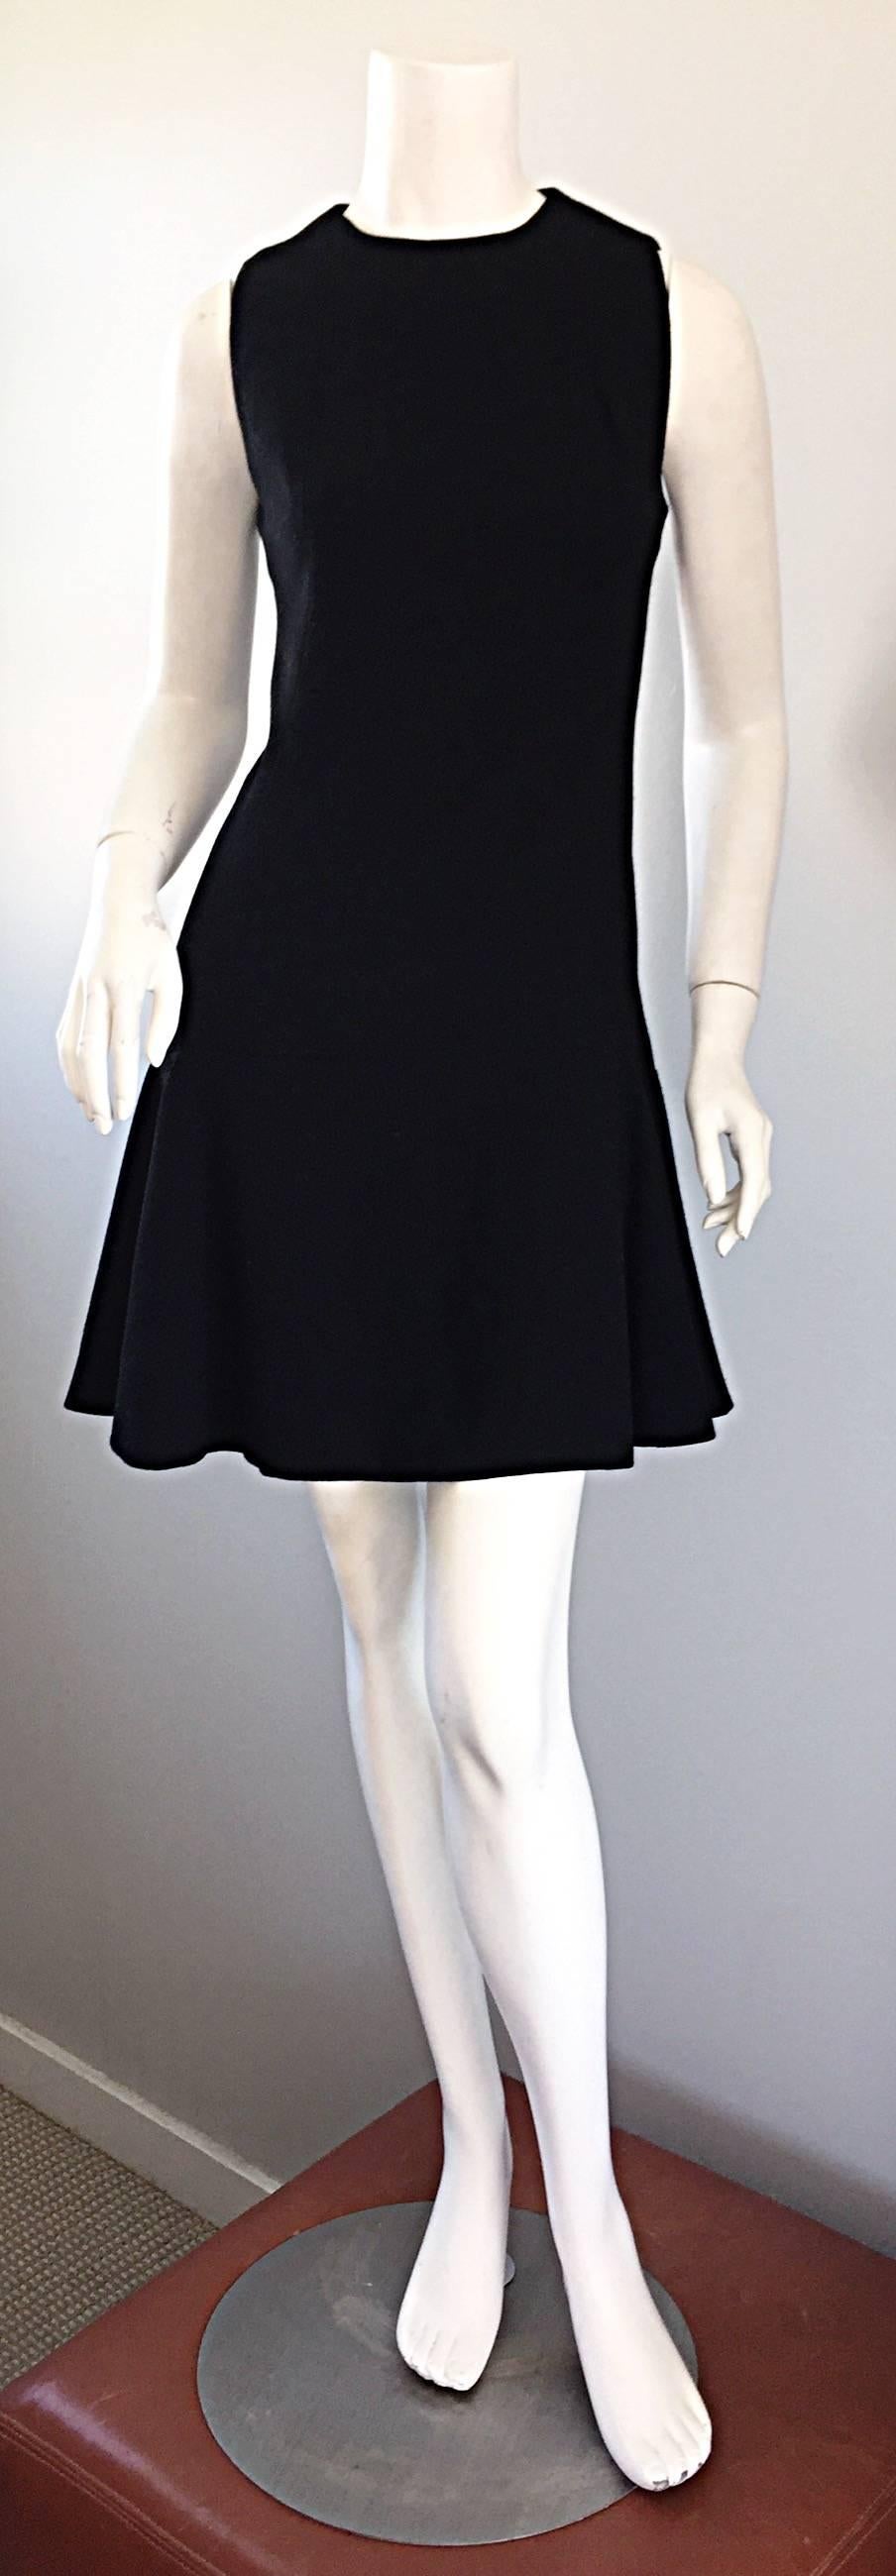 The ultimate vintage 60s GEOFFREY BEENE classic little black dress! It is rare to find early Beene pieces like this! Softest black fine wool that drapes over the body beautifully! Tailored flattering fit, with a soft drop waist and pleated trumpet